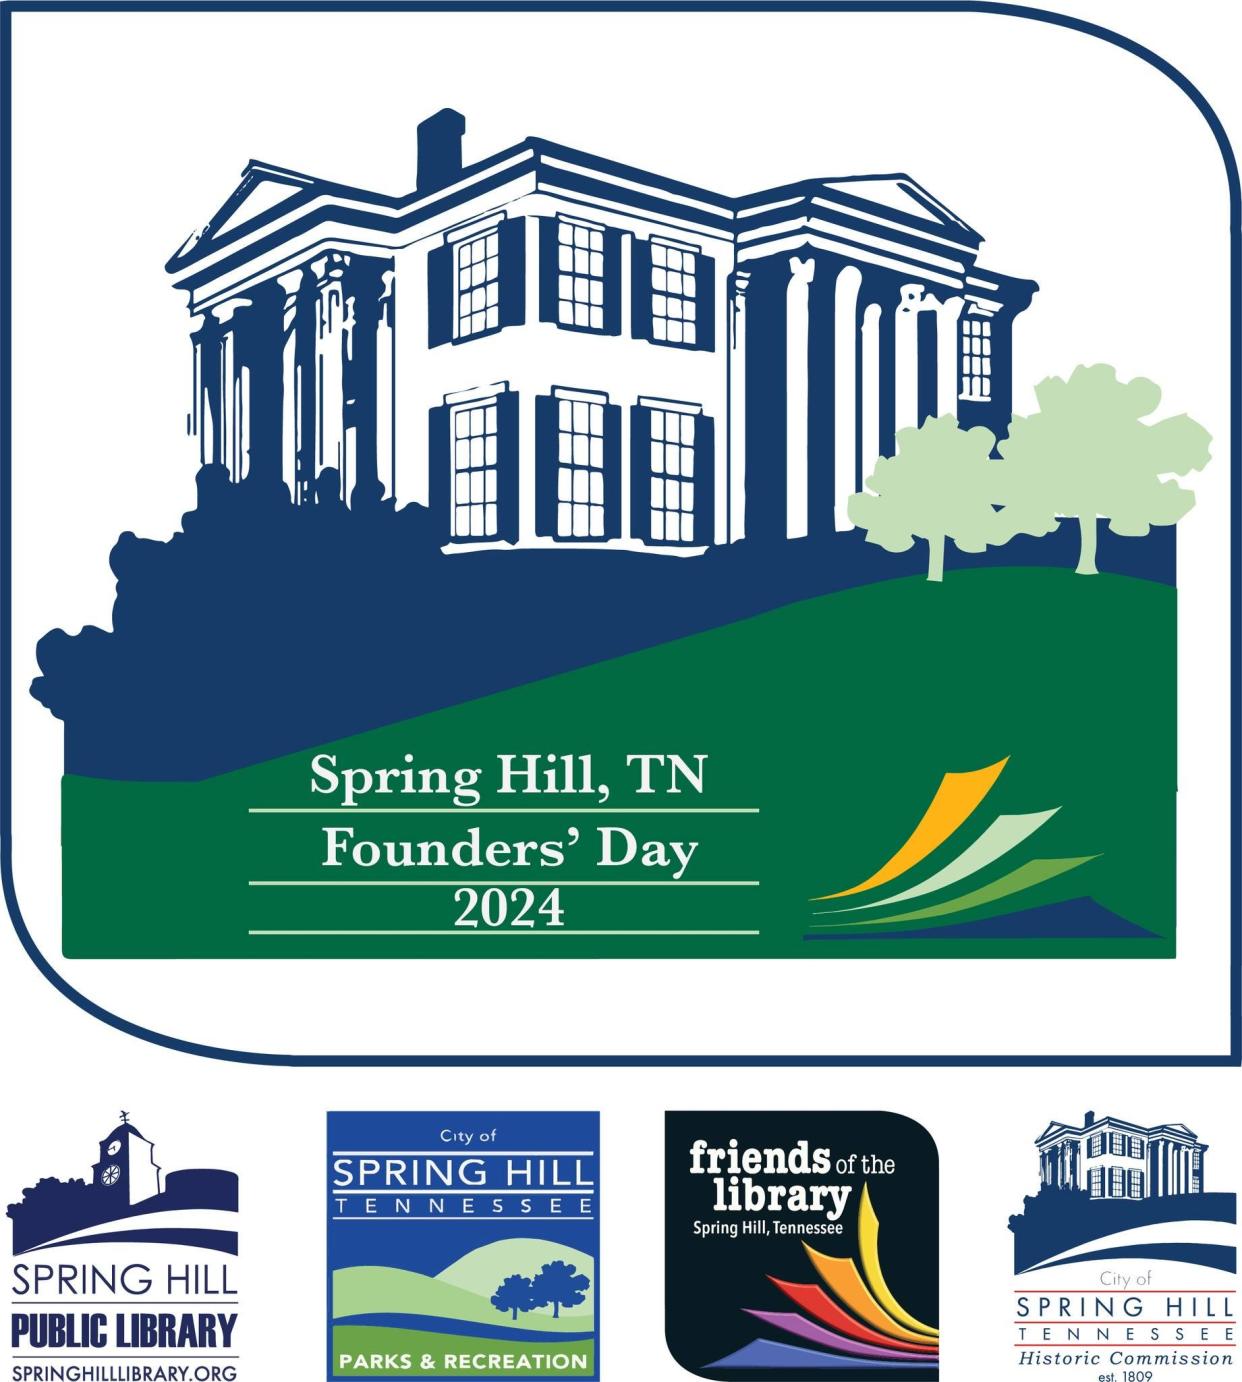 Spring Hill Public Library will host Founders' Day, with multiple events, speakers and presentations throughout the weekend at many of the city's historic sites.